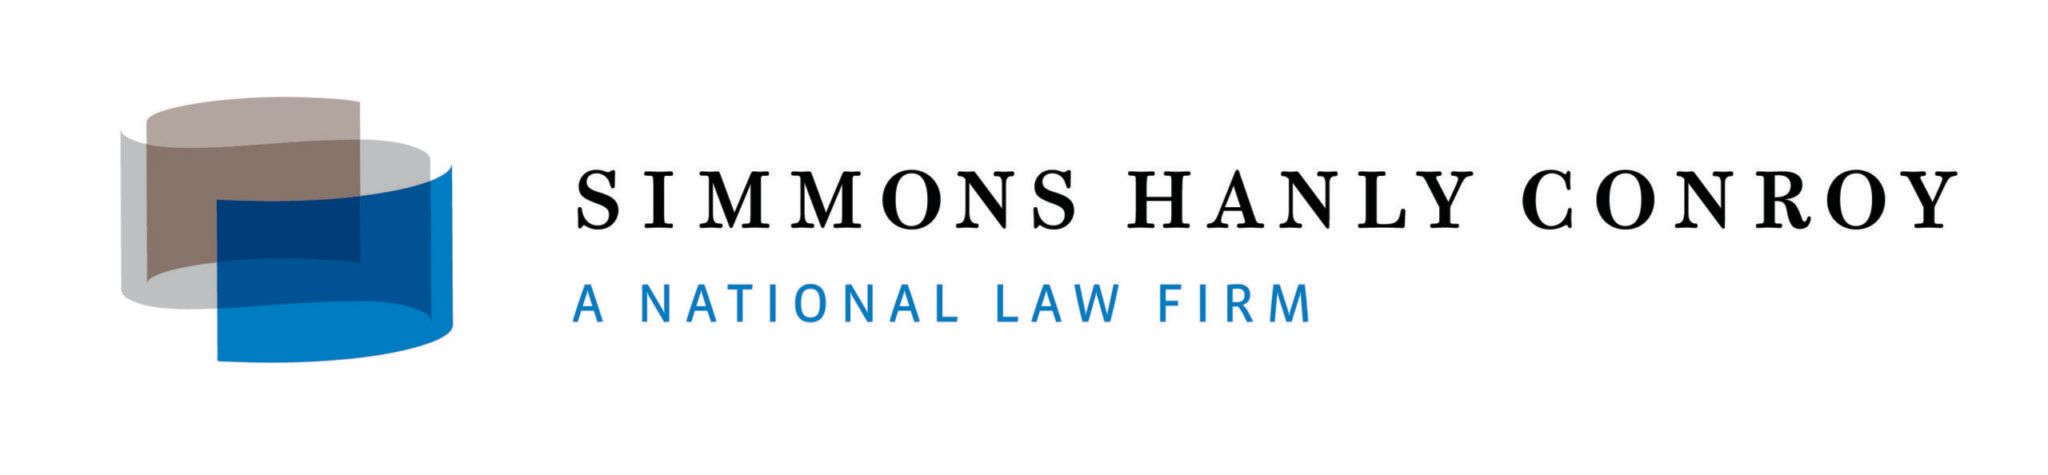 Simmons Hanly Conroy LLP law firm logo